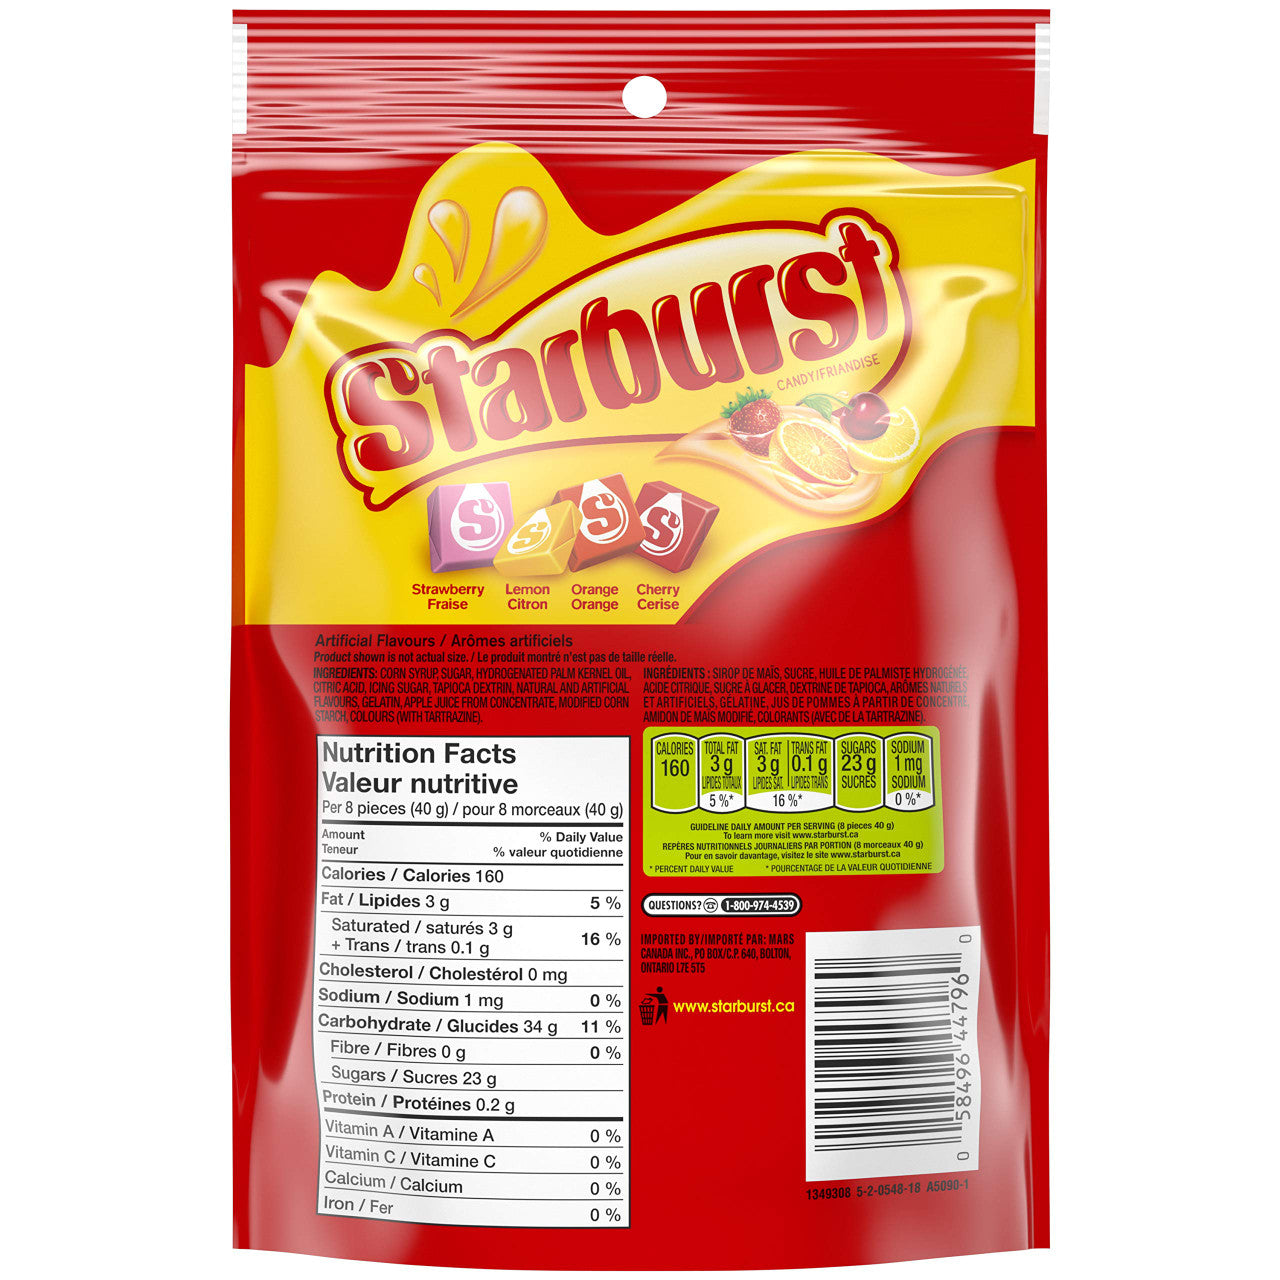 Starburst Original Fruit Chews Candy, Stand Up Pouch, 320g/11.3oz, (Imported from Canada)